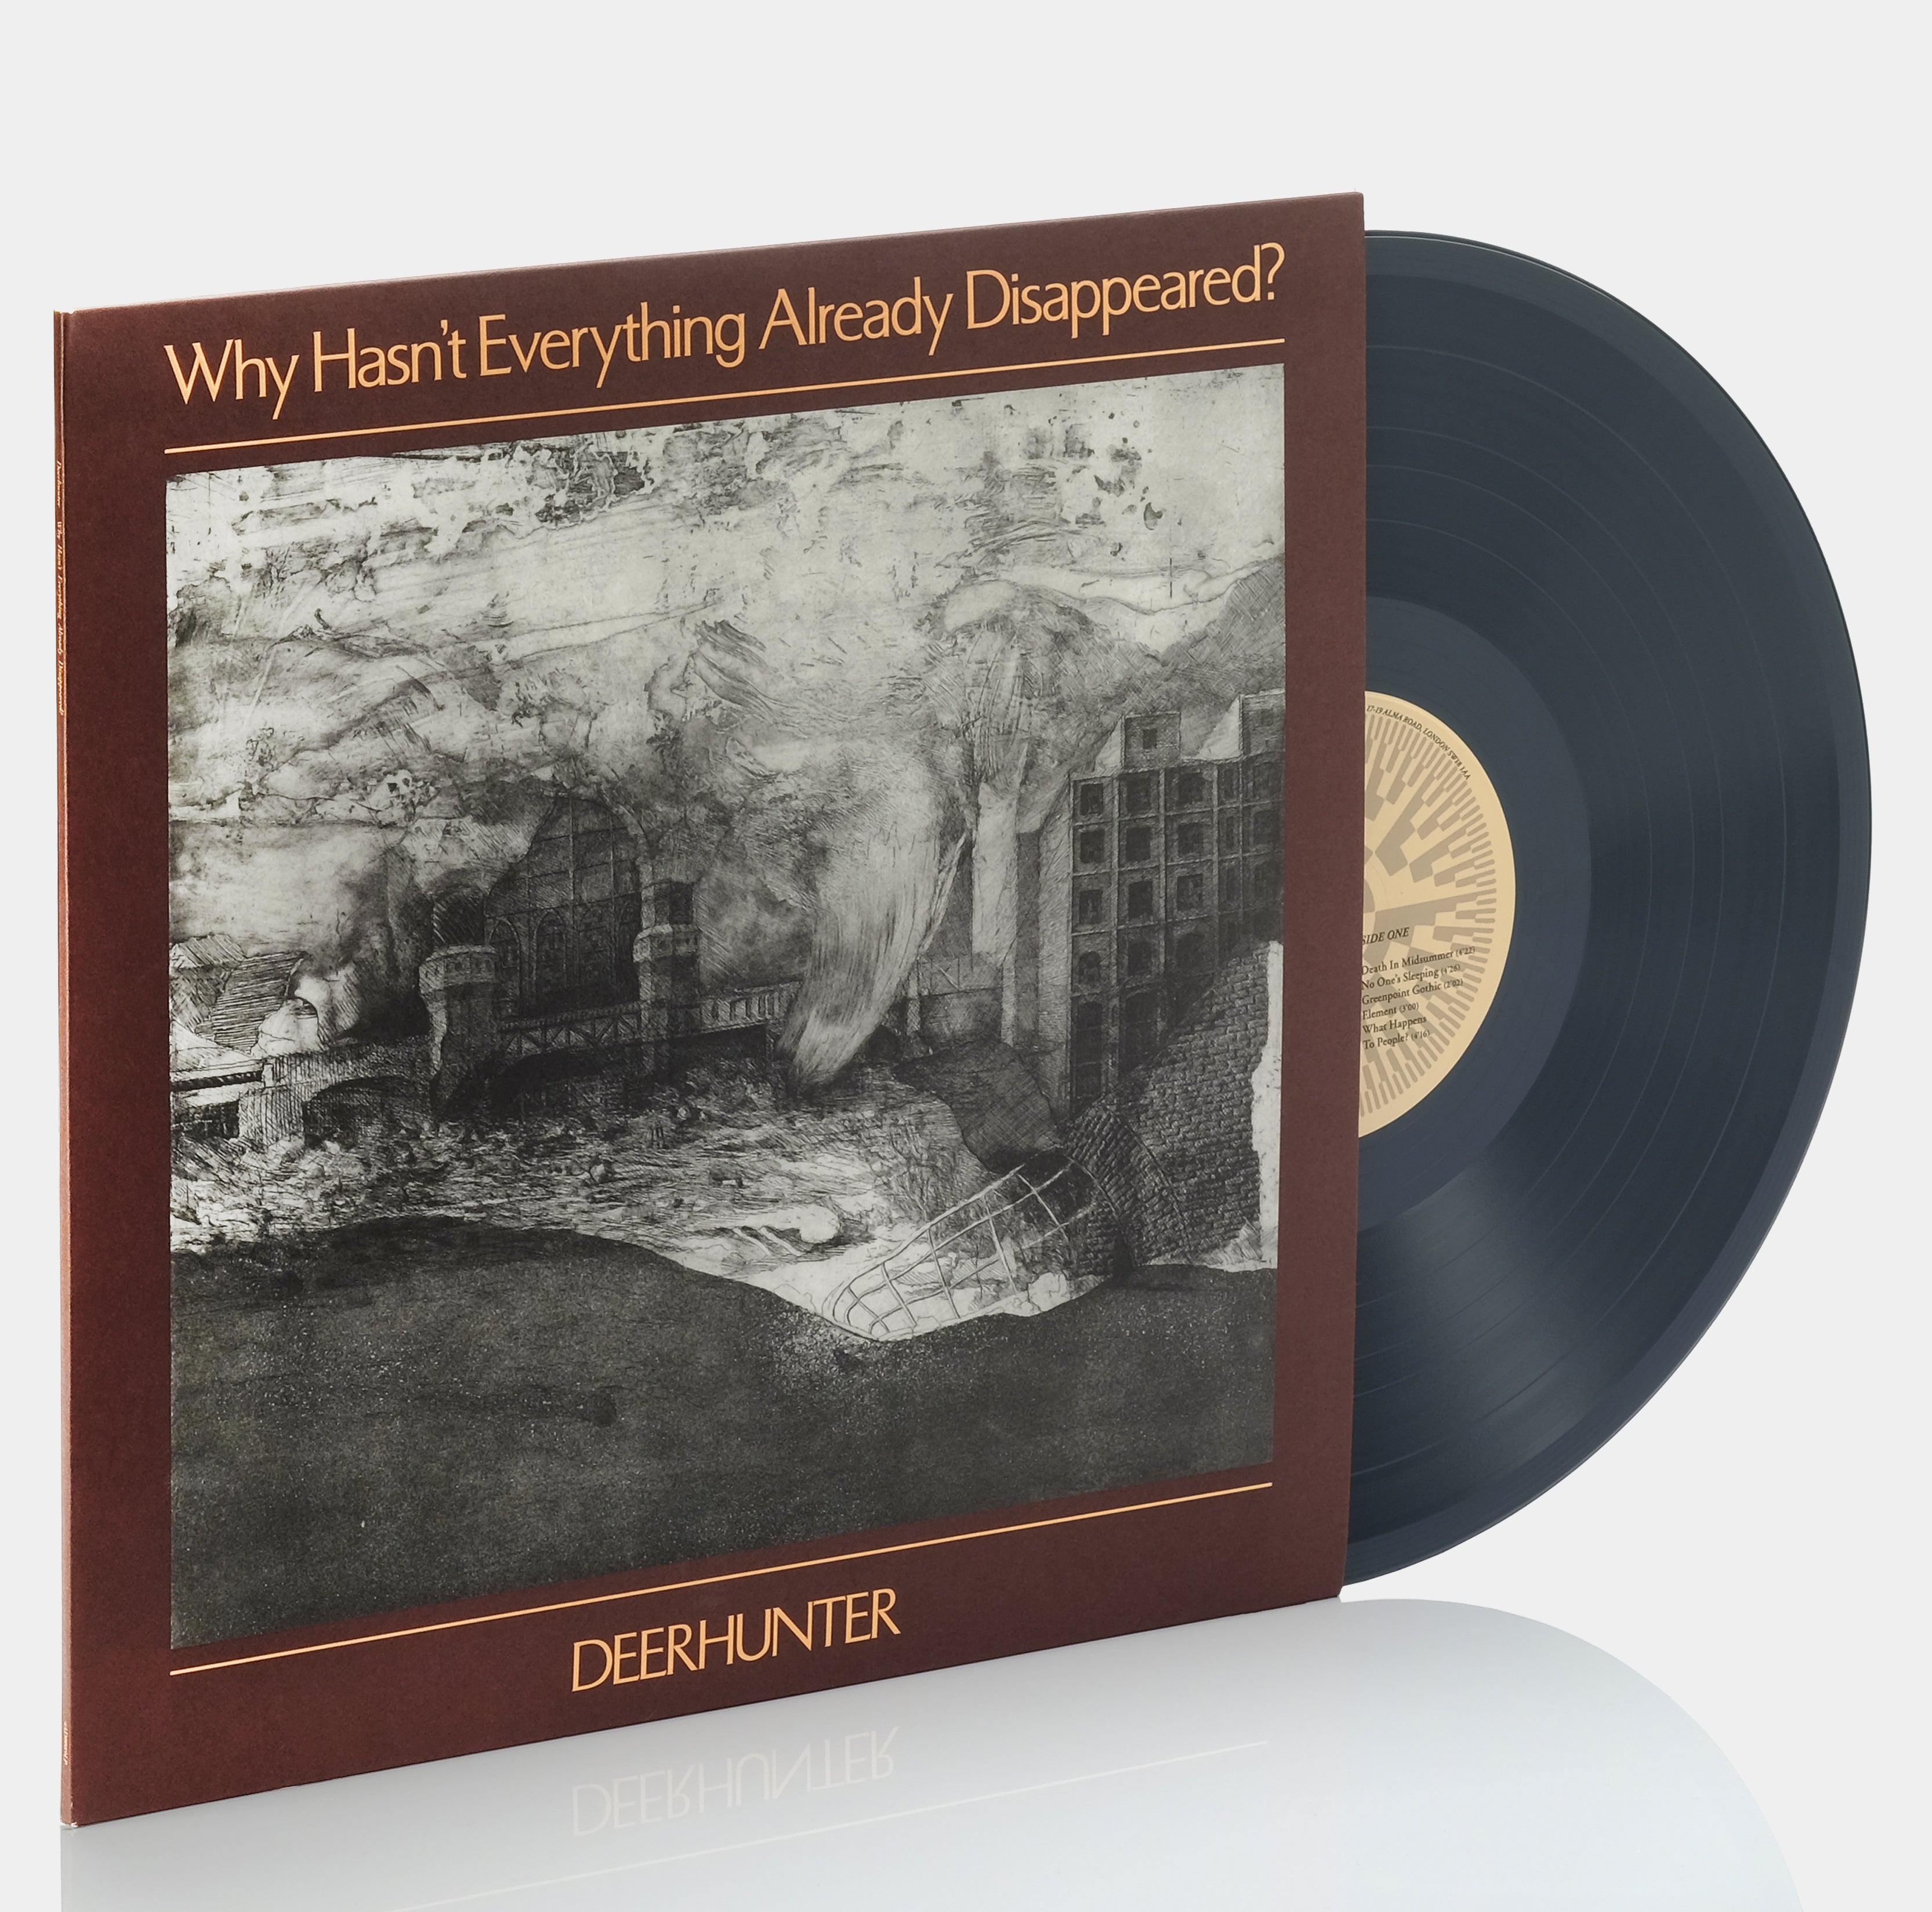 Deerhunter - Why Hasn't Everything Already Disappeared? LP Grey Vinyl Record